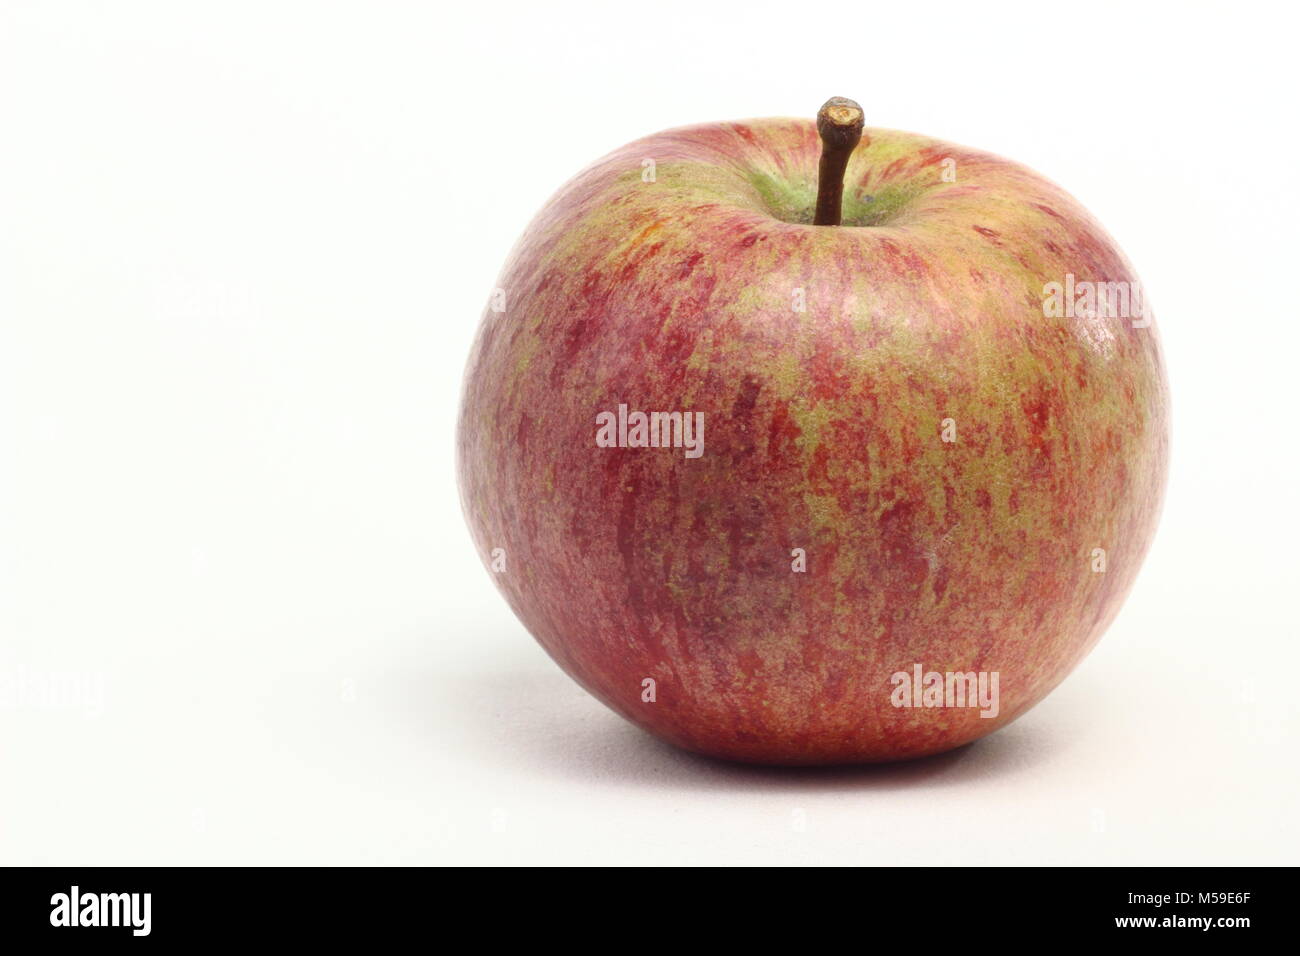 Malus domestica 'Bess Pool', a heritage English apple variety with many synonyms. White background, UK Stock Photo